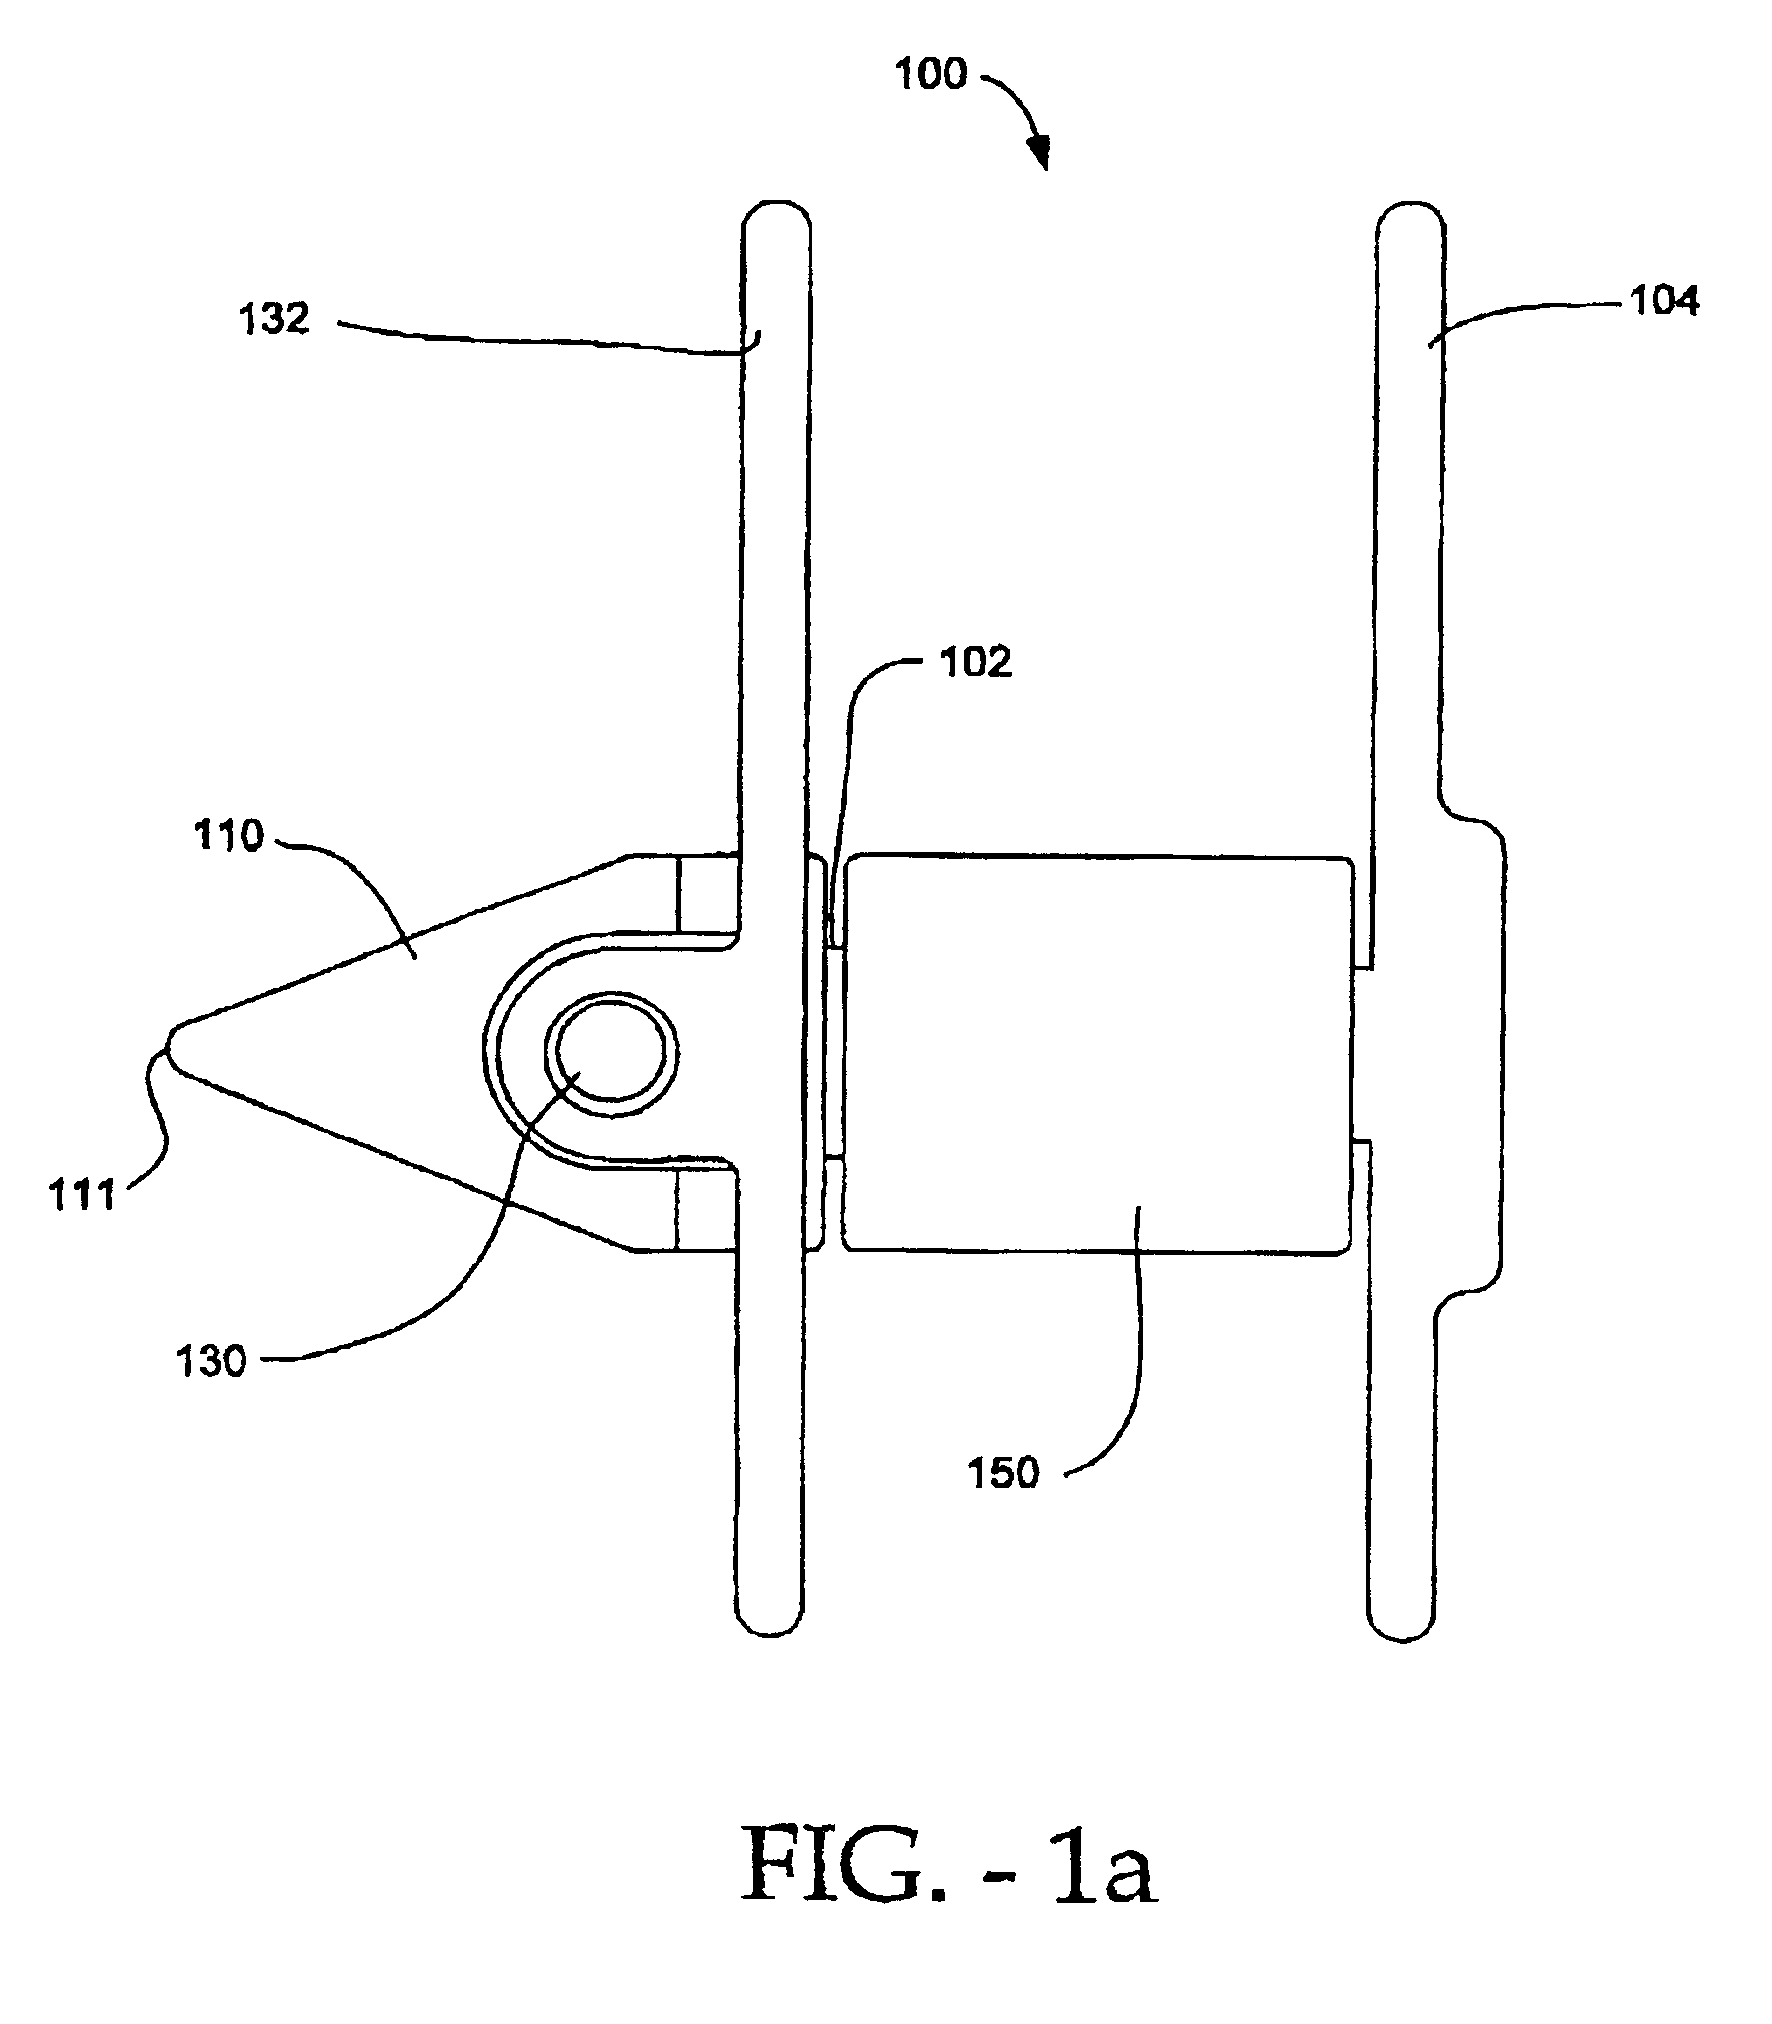 Deflectable spacer for use as an interspinous process implant and method